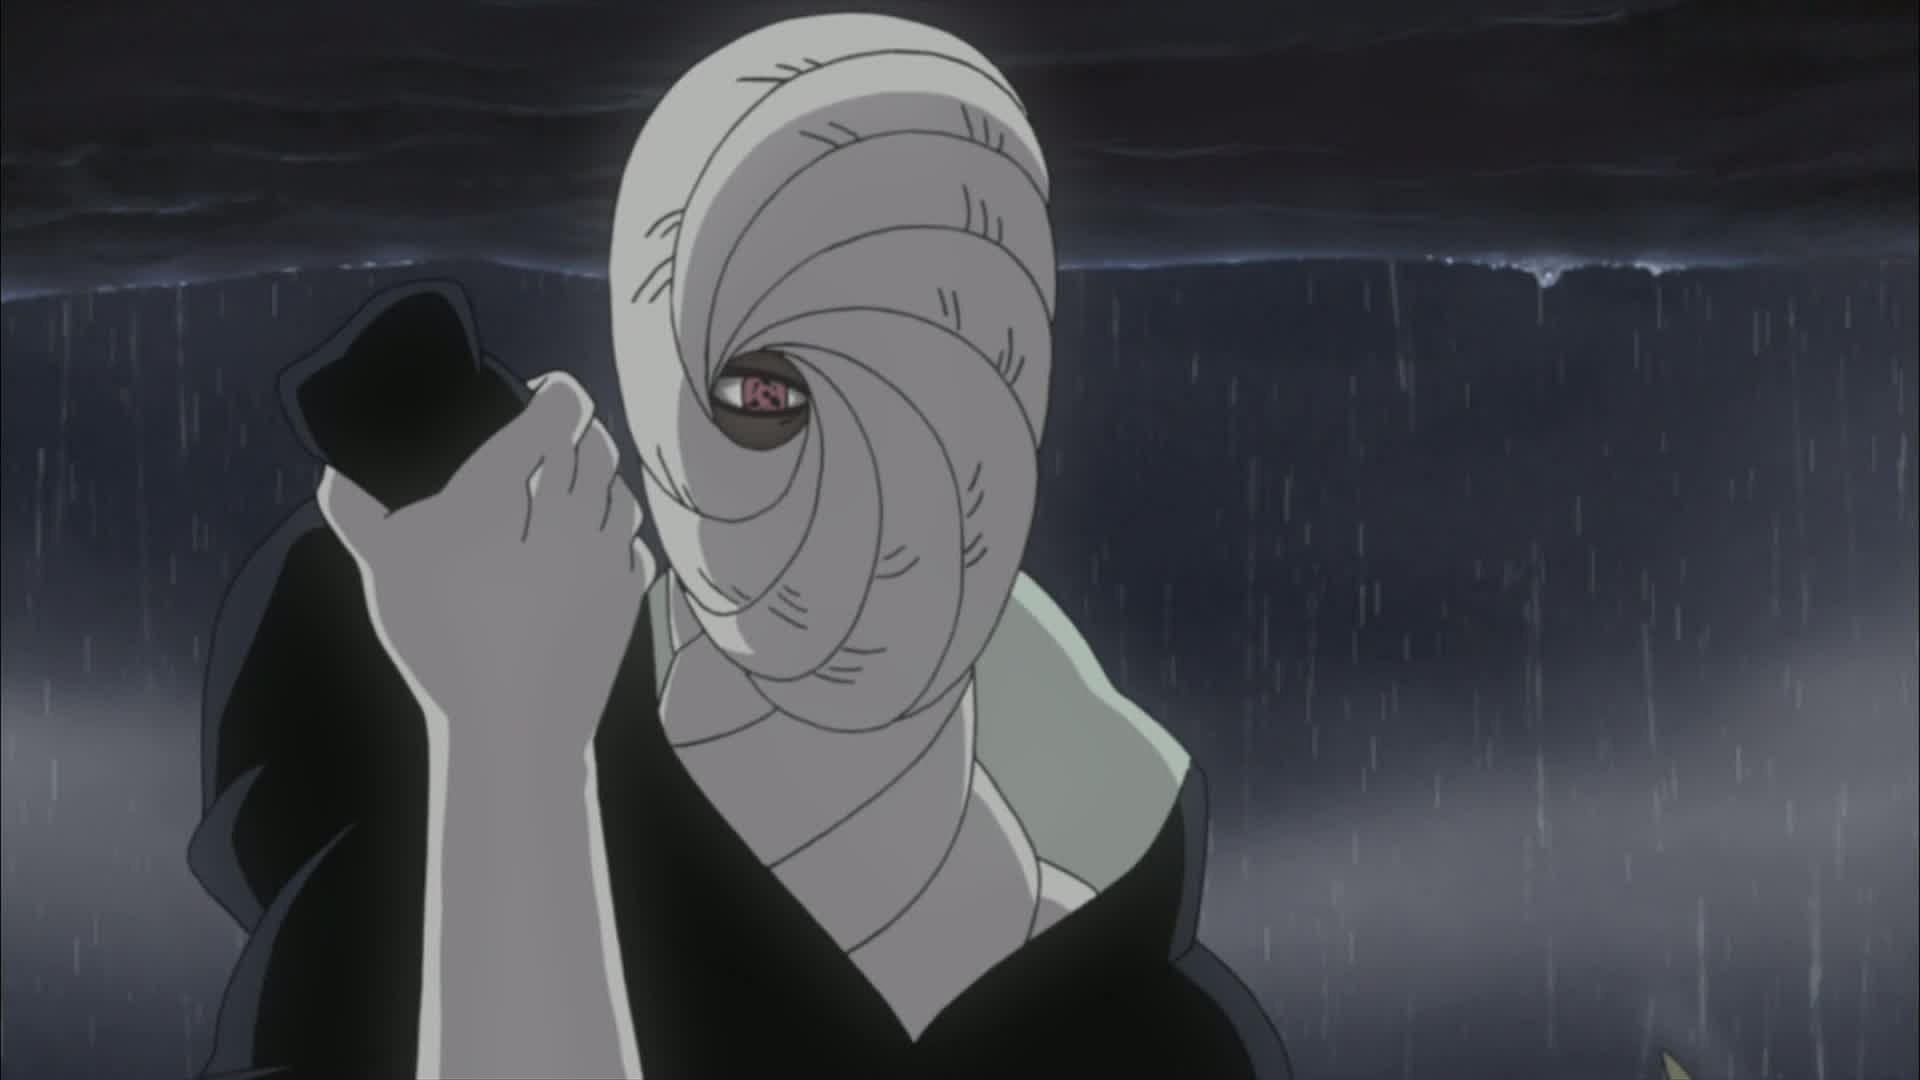 Teenage Obito with White Zetsu wrapped around him, as seen after killing Hidden Mist ninja in a rage after watching Rin die. Truly where the spirit of Obito Uchiha of the Hidden Leaf died (Image via Studio Pierrot)